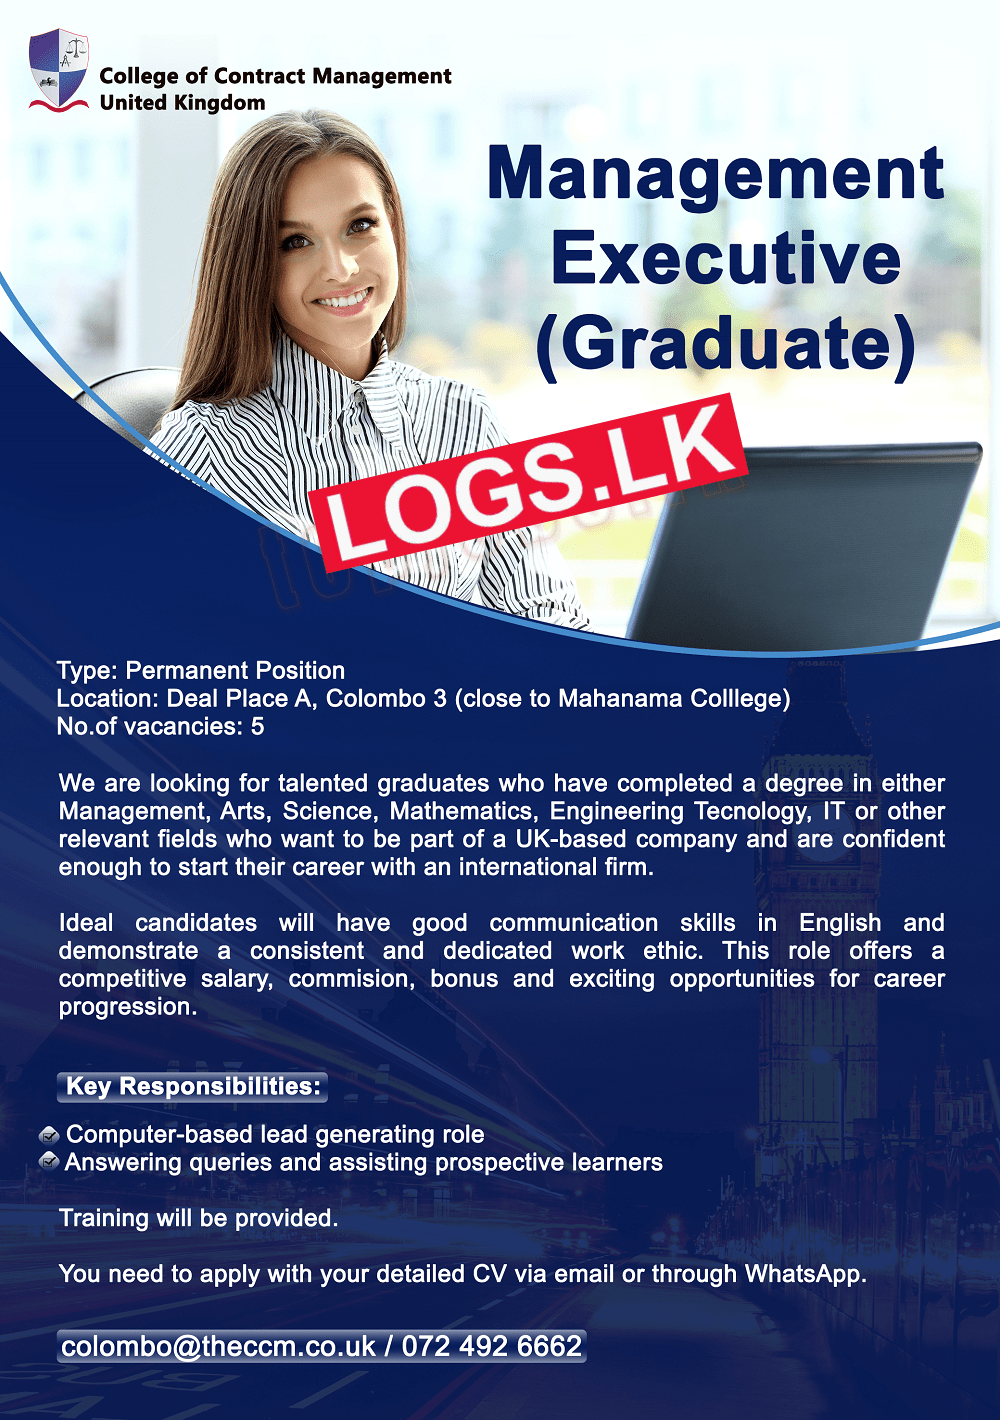 Management Executive (Graduate) Vacancy at College of Contract Management United Kingdom